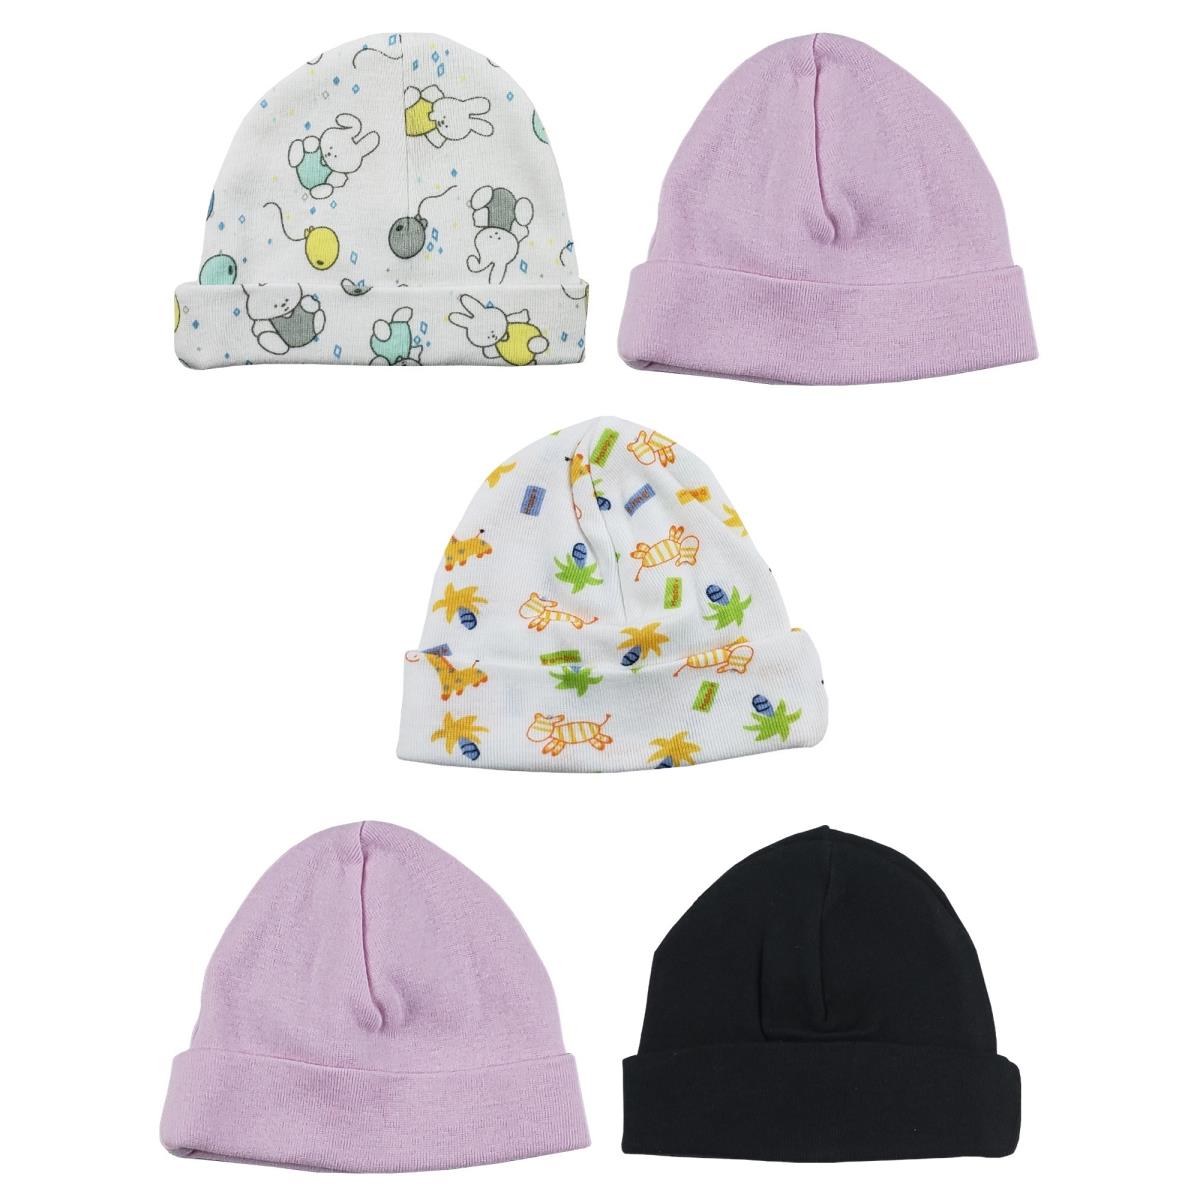 Picture of Bambini LS-0325 Girls Baby Cap - Black&#44; Prints & Pink - One Size - 5 per Pack